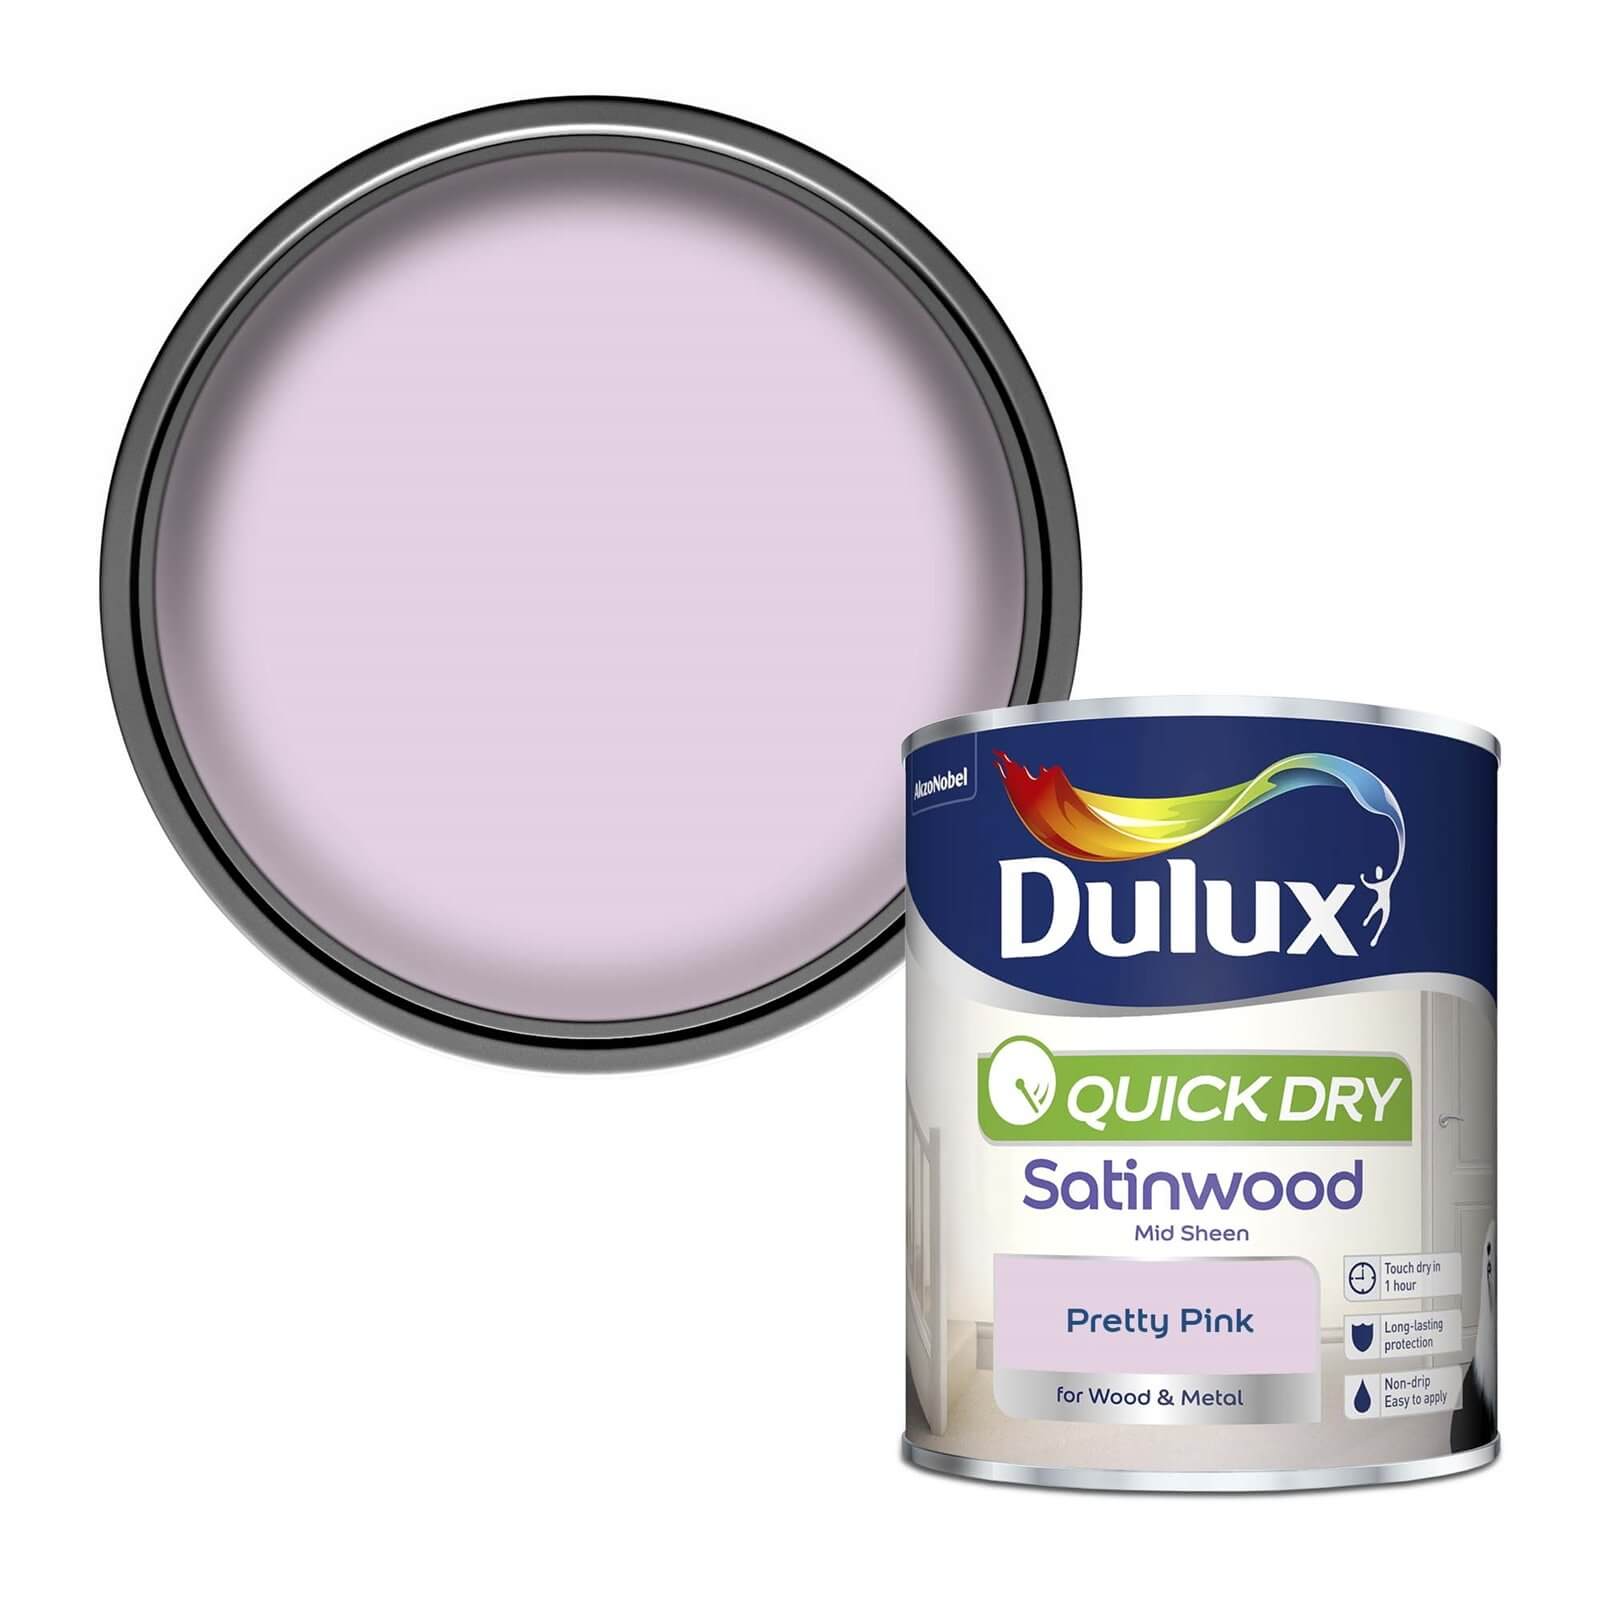 Dulux Quick Dry Satinwood Paint Pretty Pink - 750ml